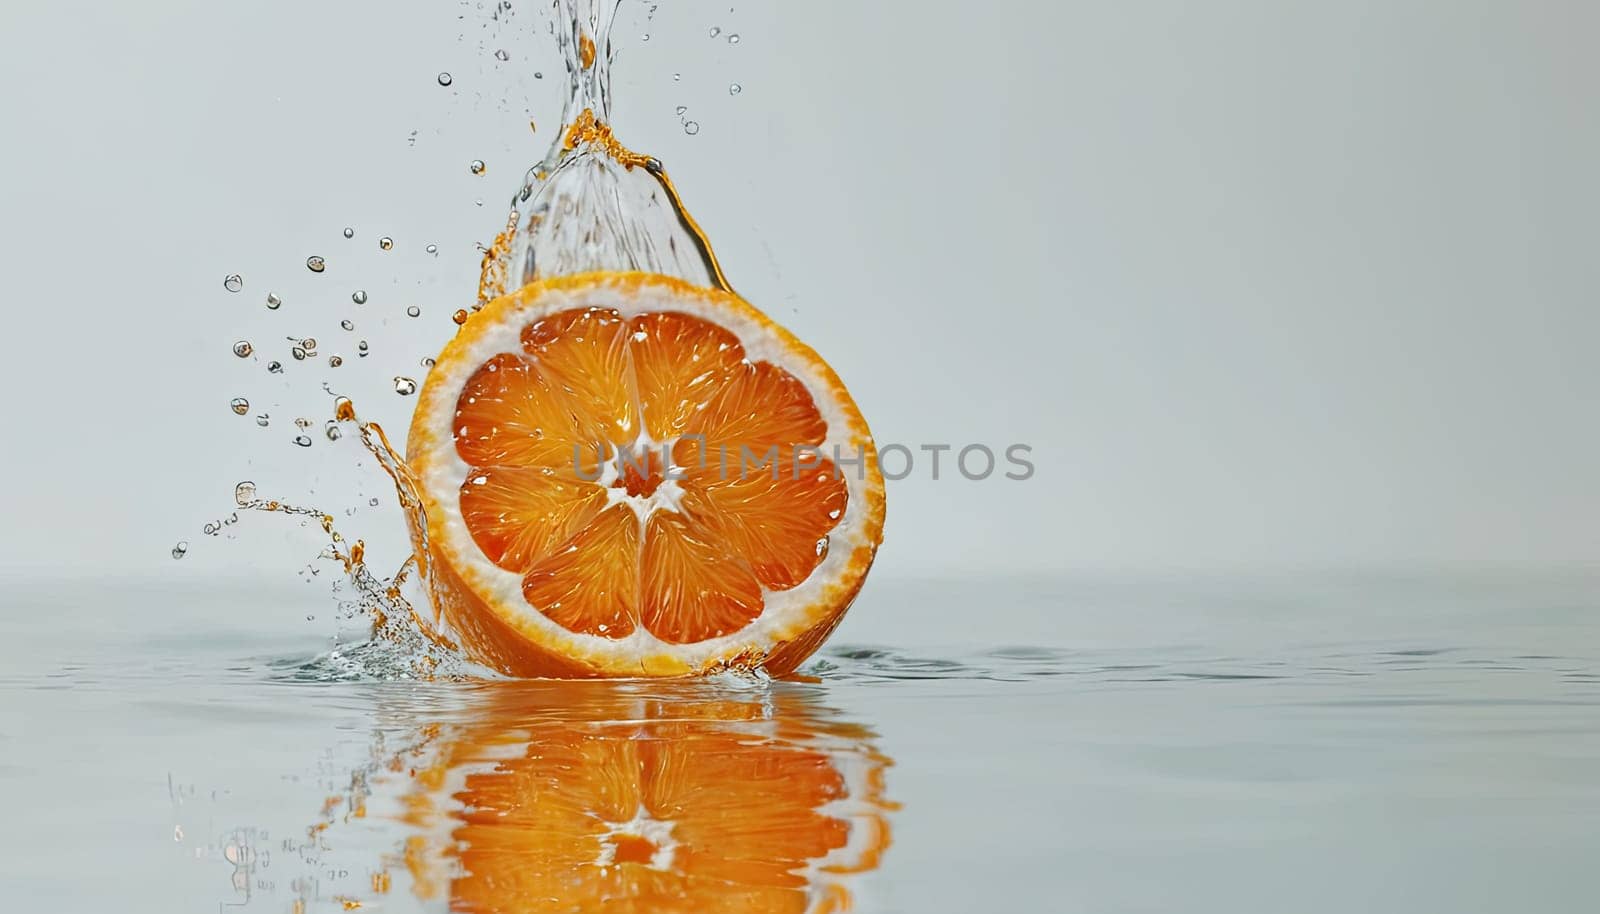 Orange slices in water. Bright upright on wet surface